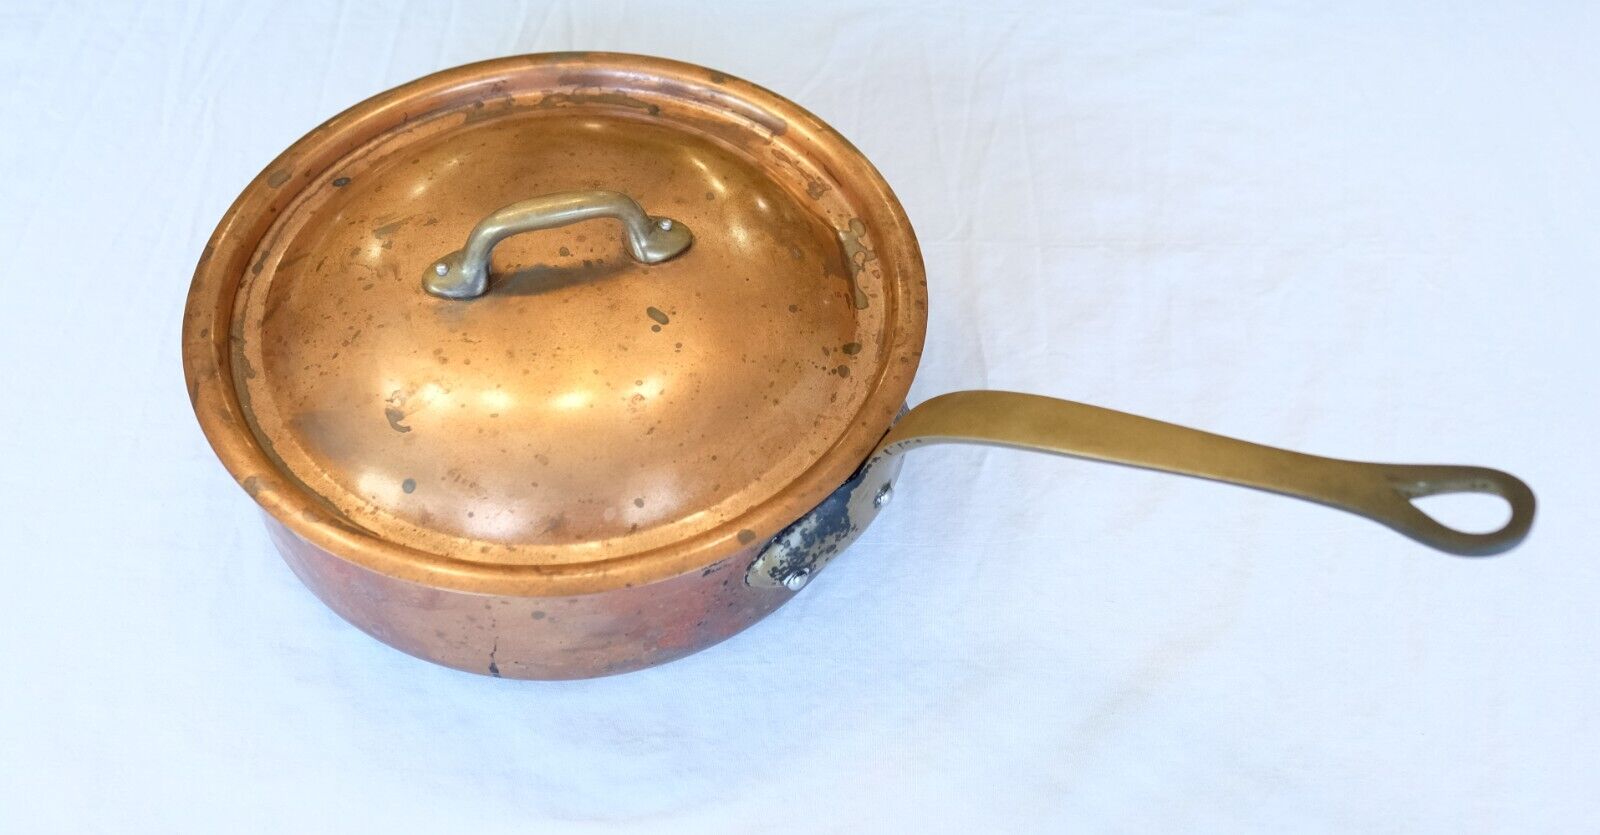 Williams Sonoma (Mauviel?) France Copper Saute / Fry Pan 10” w/ Lid - GAS Only